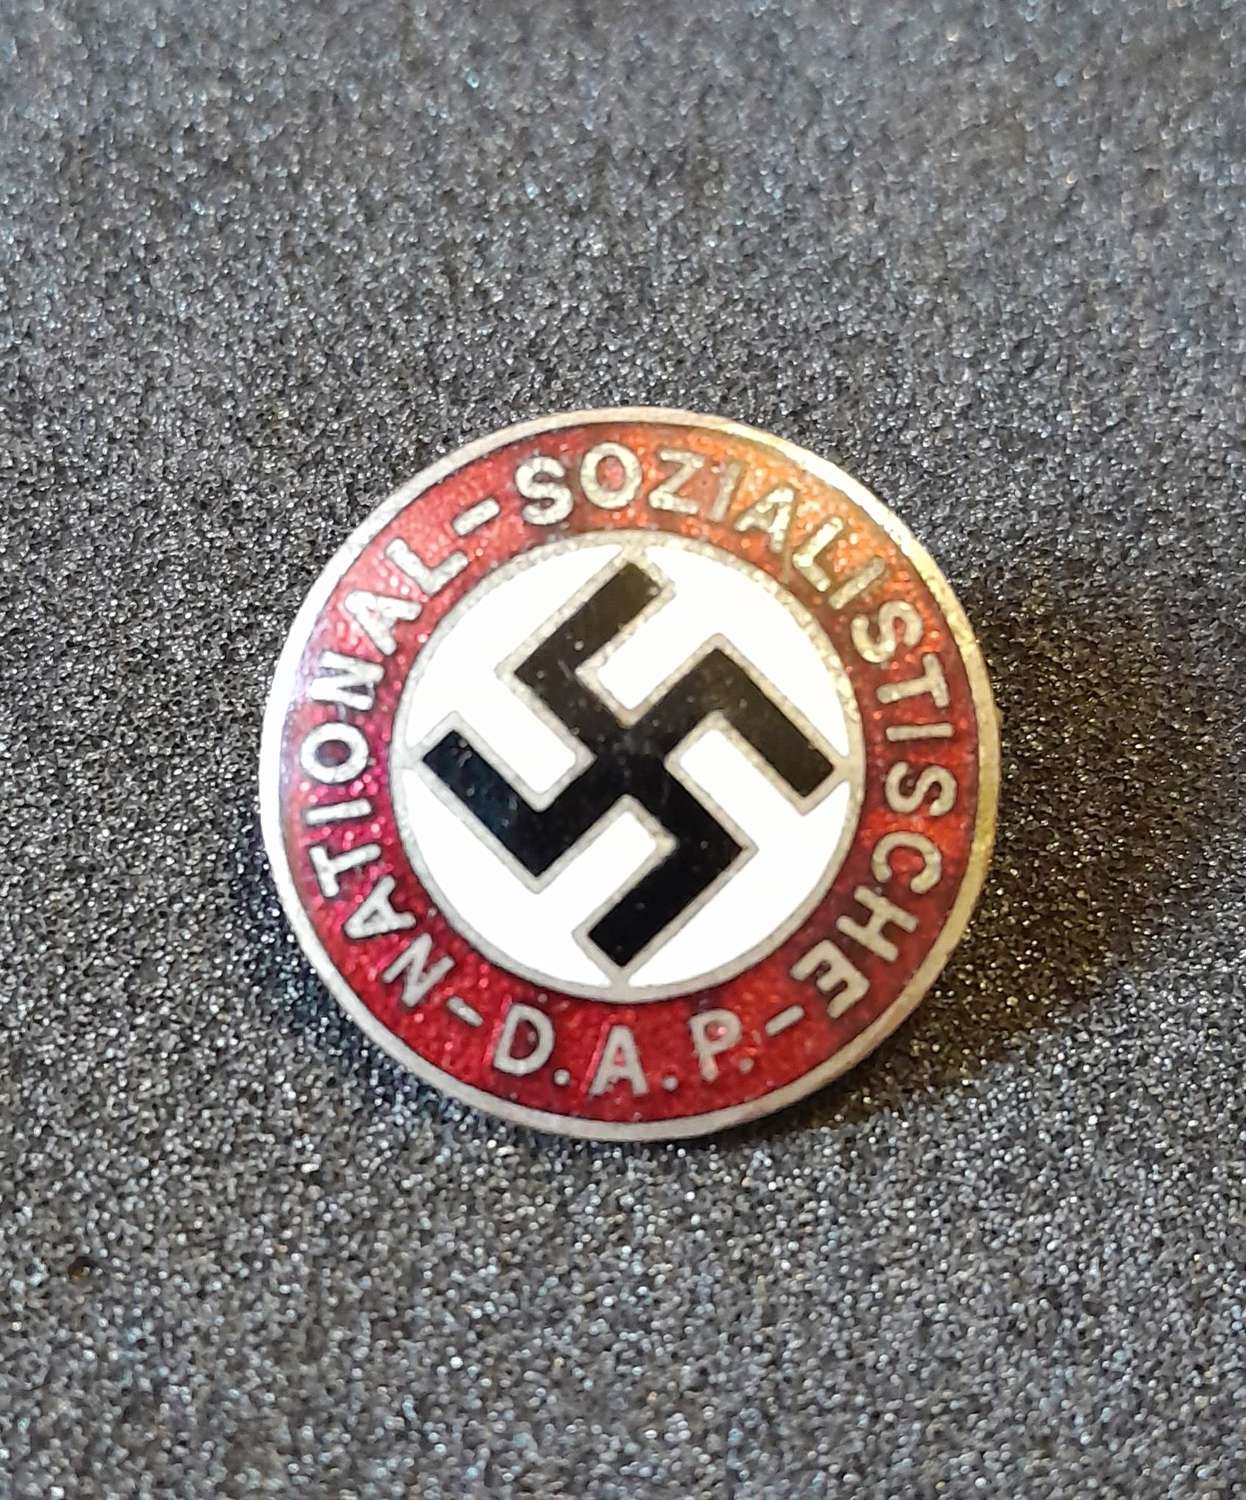 N.S.D.A.P Party Badge